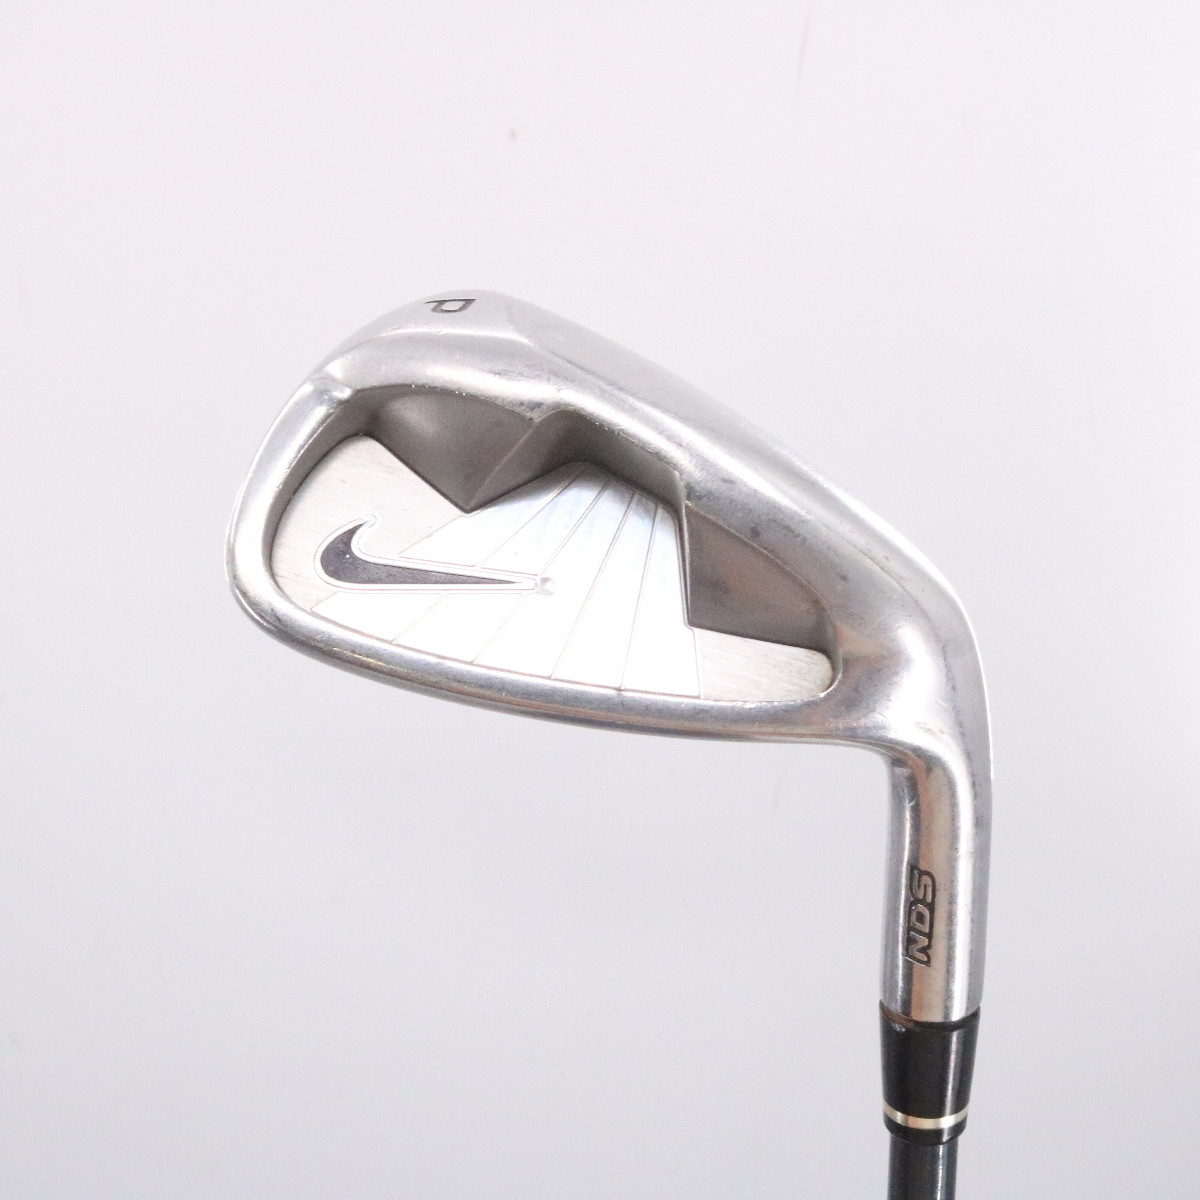 nike nds irons for sale